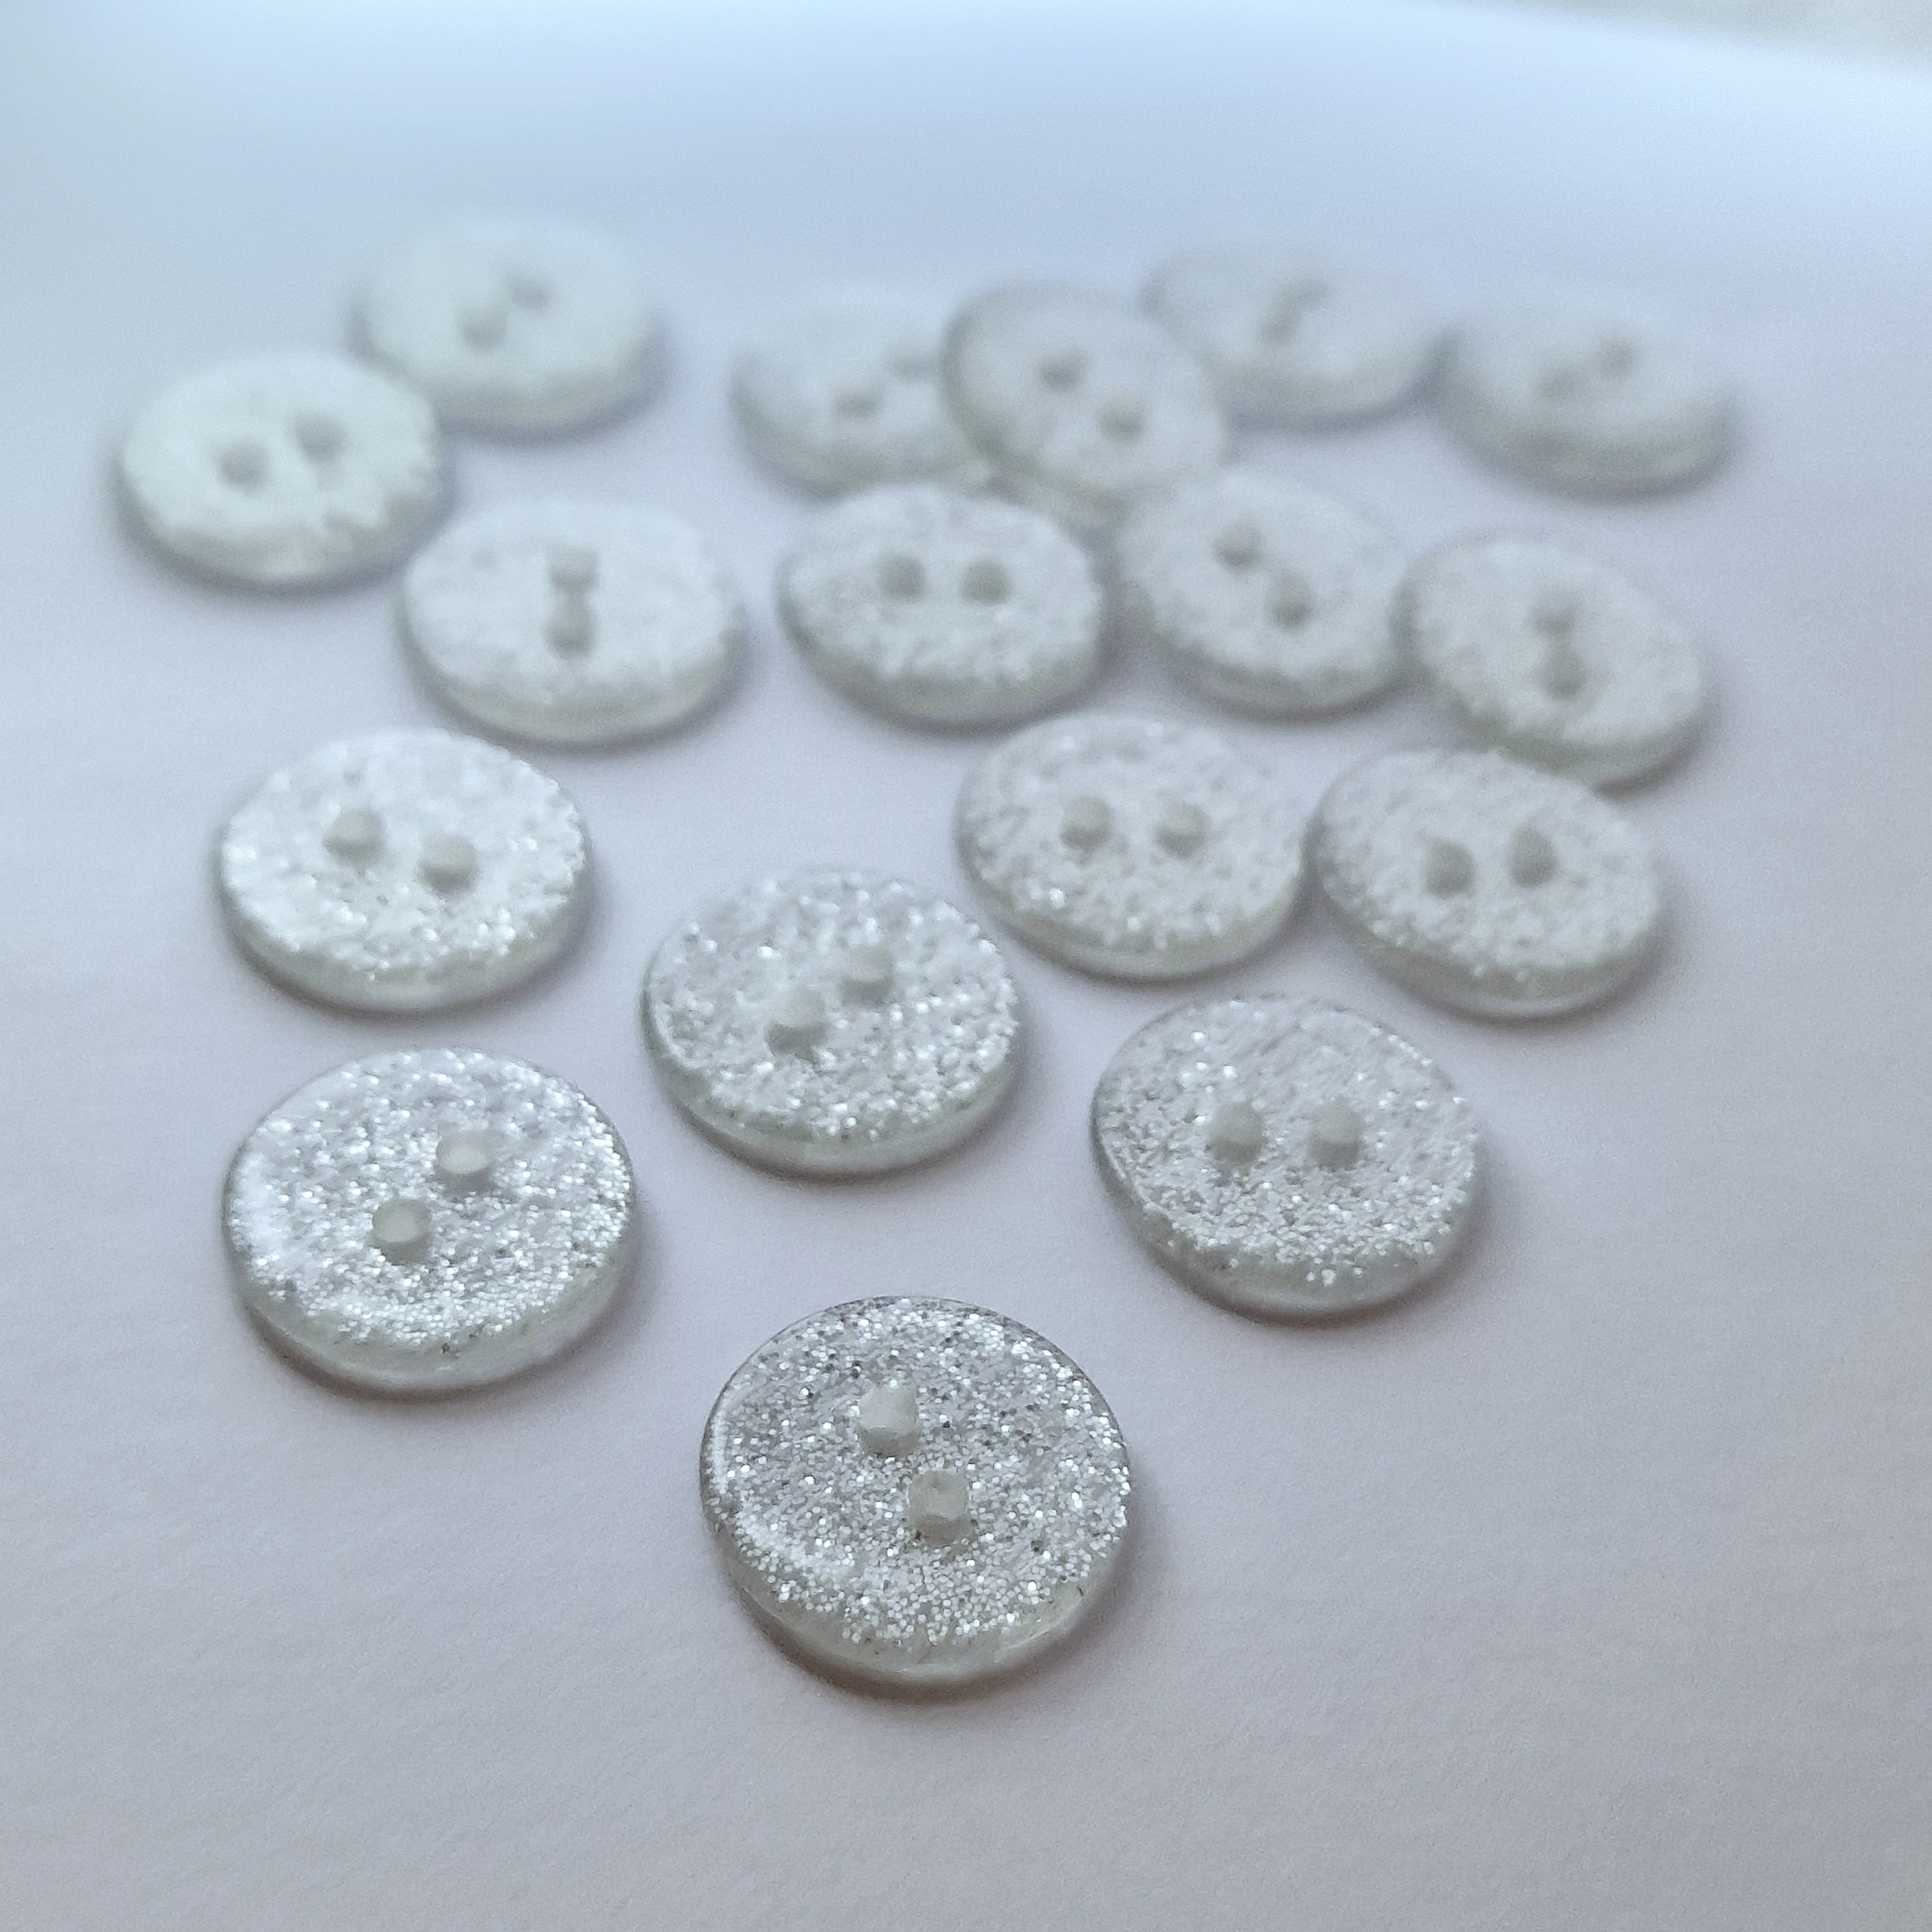 MajorCrafts 80pcs 10mm Clear Silver Glitter 2 Holes Round Sewing Resin Buttons